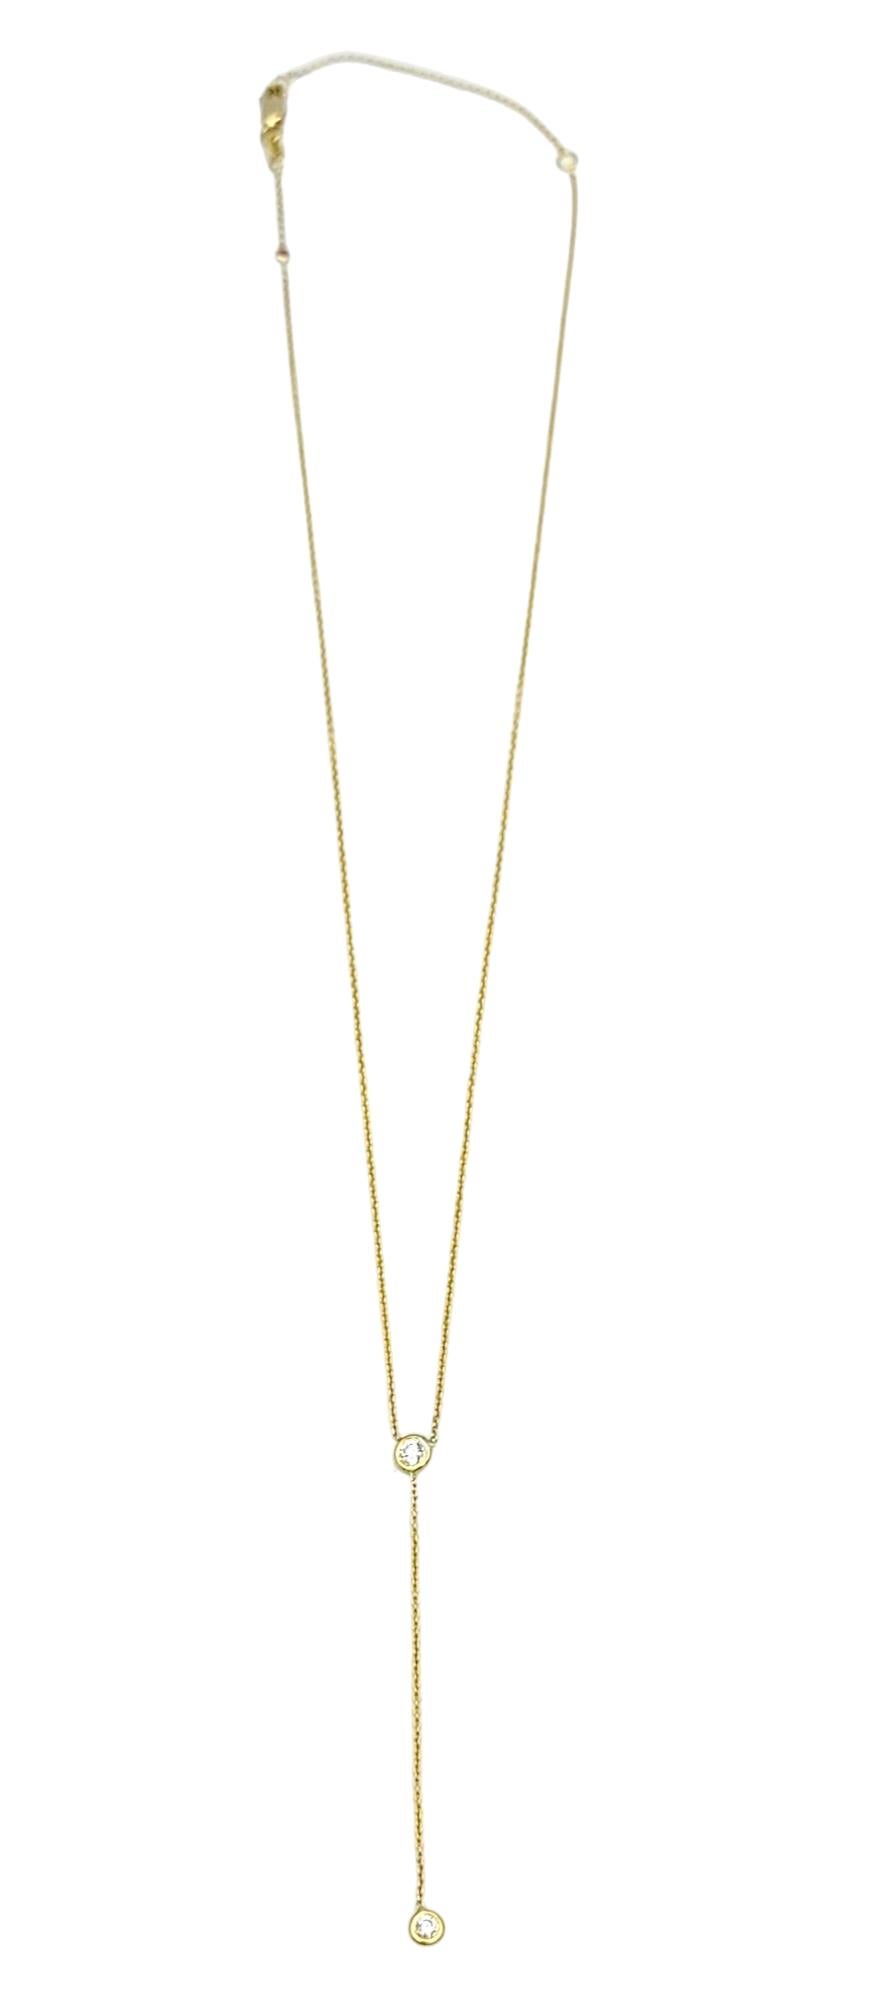 This stunning Roberto Coin 'Diamonds By The Inch' lariat necklace, crafted in opulent 18 karat yellow gold, exudes timeless elegance and sophistication. This exquisite necklace features two bezel-set round diamonds delicately spaced along the drop